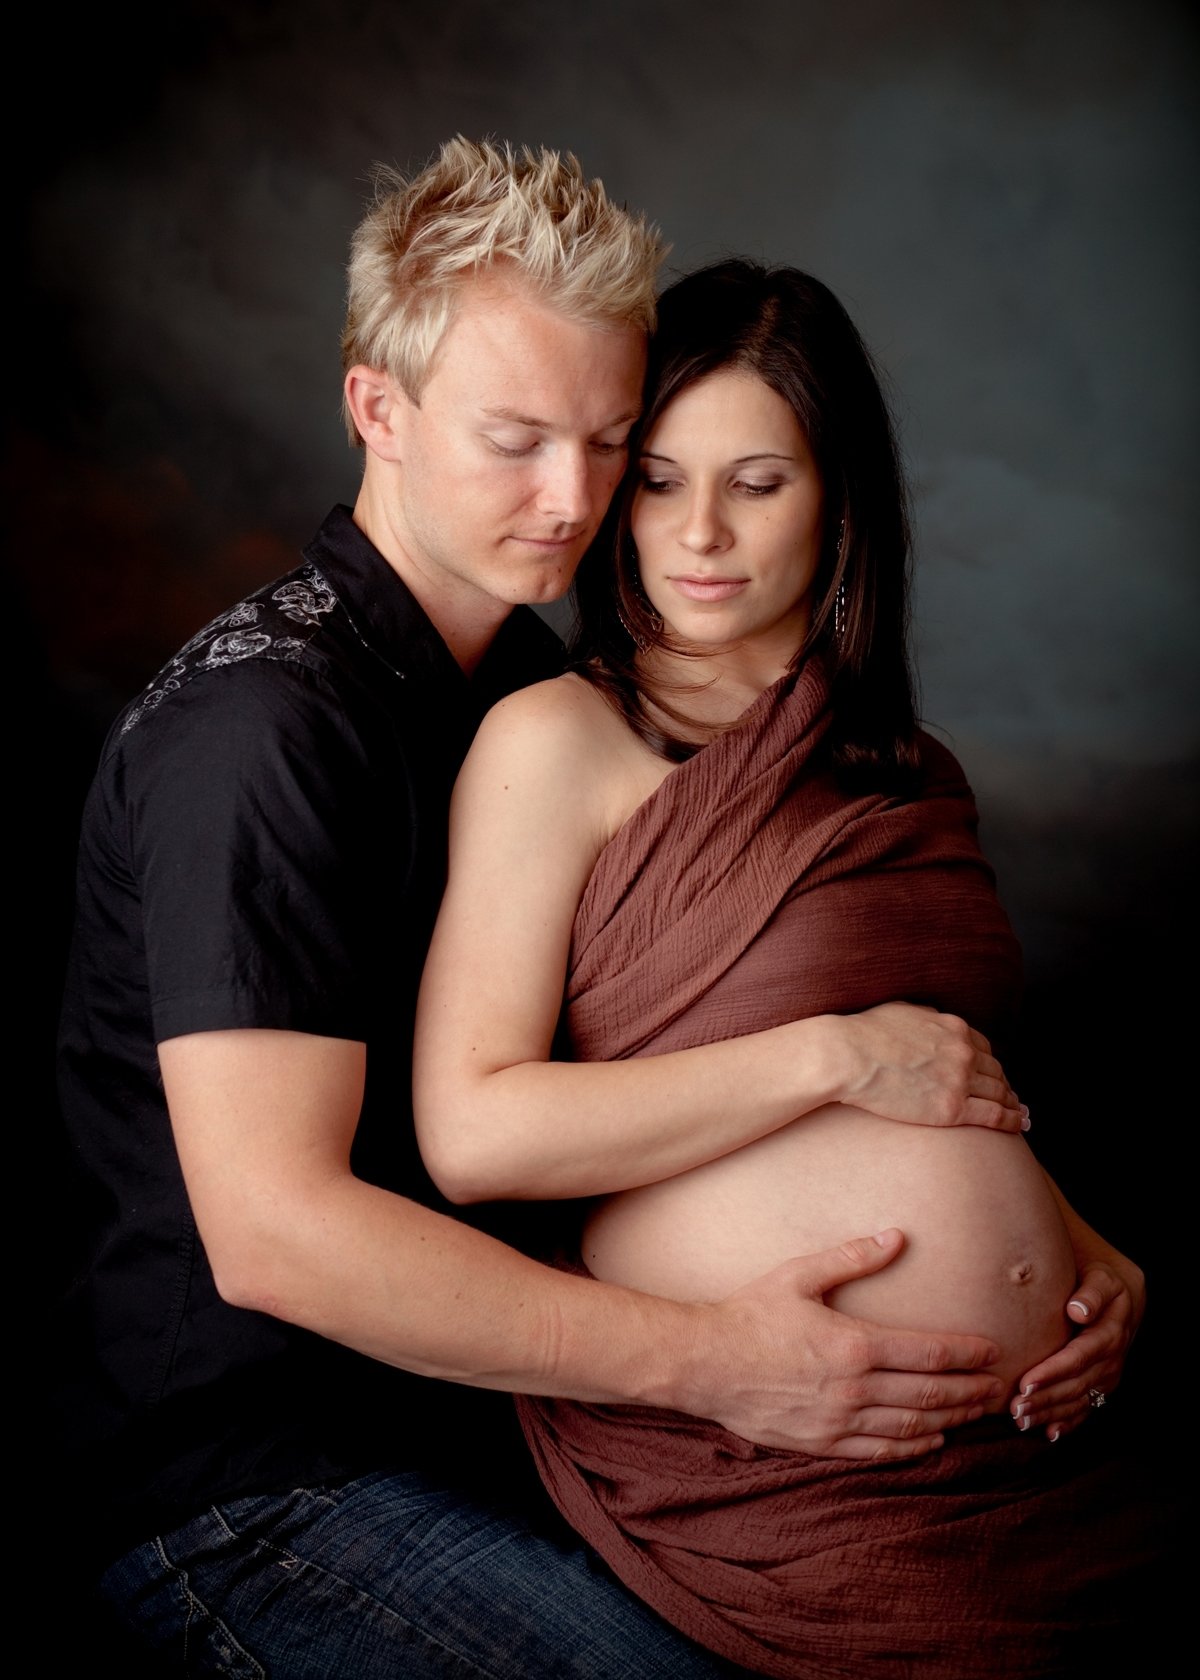 10 Stunning Maternity Picture Ideas With Husband maternitypictureideaswithhusband maternity photography 2022